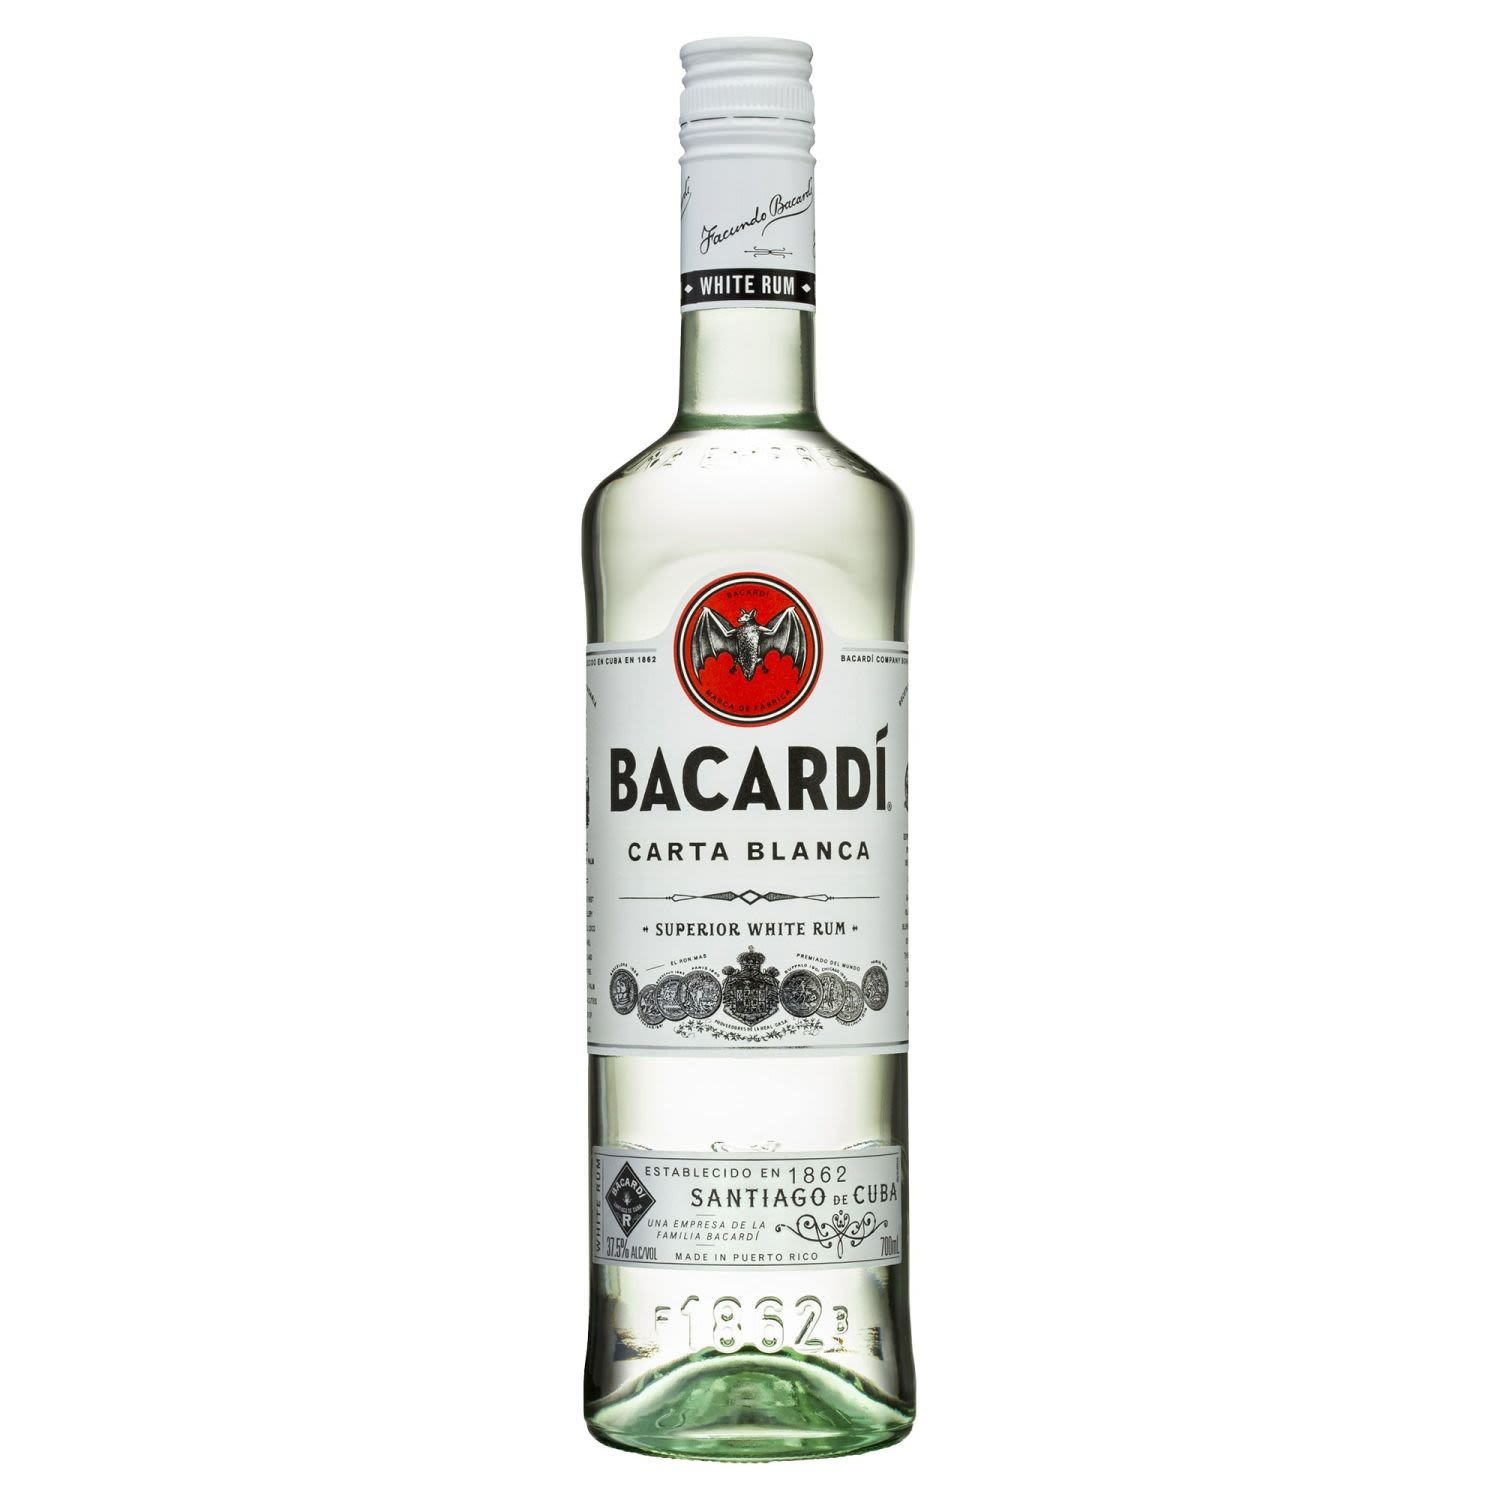 Bacardi Superior Original Premium Rum, expertly crafted by Maestros De Ron Bacardi. This rum has light vanilla notes, developed in oak barrels, and is perfect for mixing.<br /> <br />Alcohol Volume: 37.50%<br /><br />Pack Format: Bottle<br /><br />Standard Drinks: 21<br /><br />Pack Type: Bottle<br /><br />Country of Origin: Puerto Rico<br />